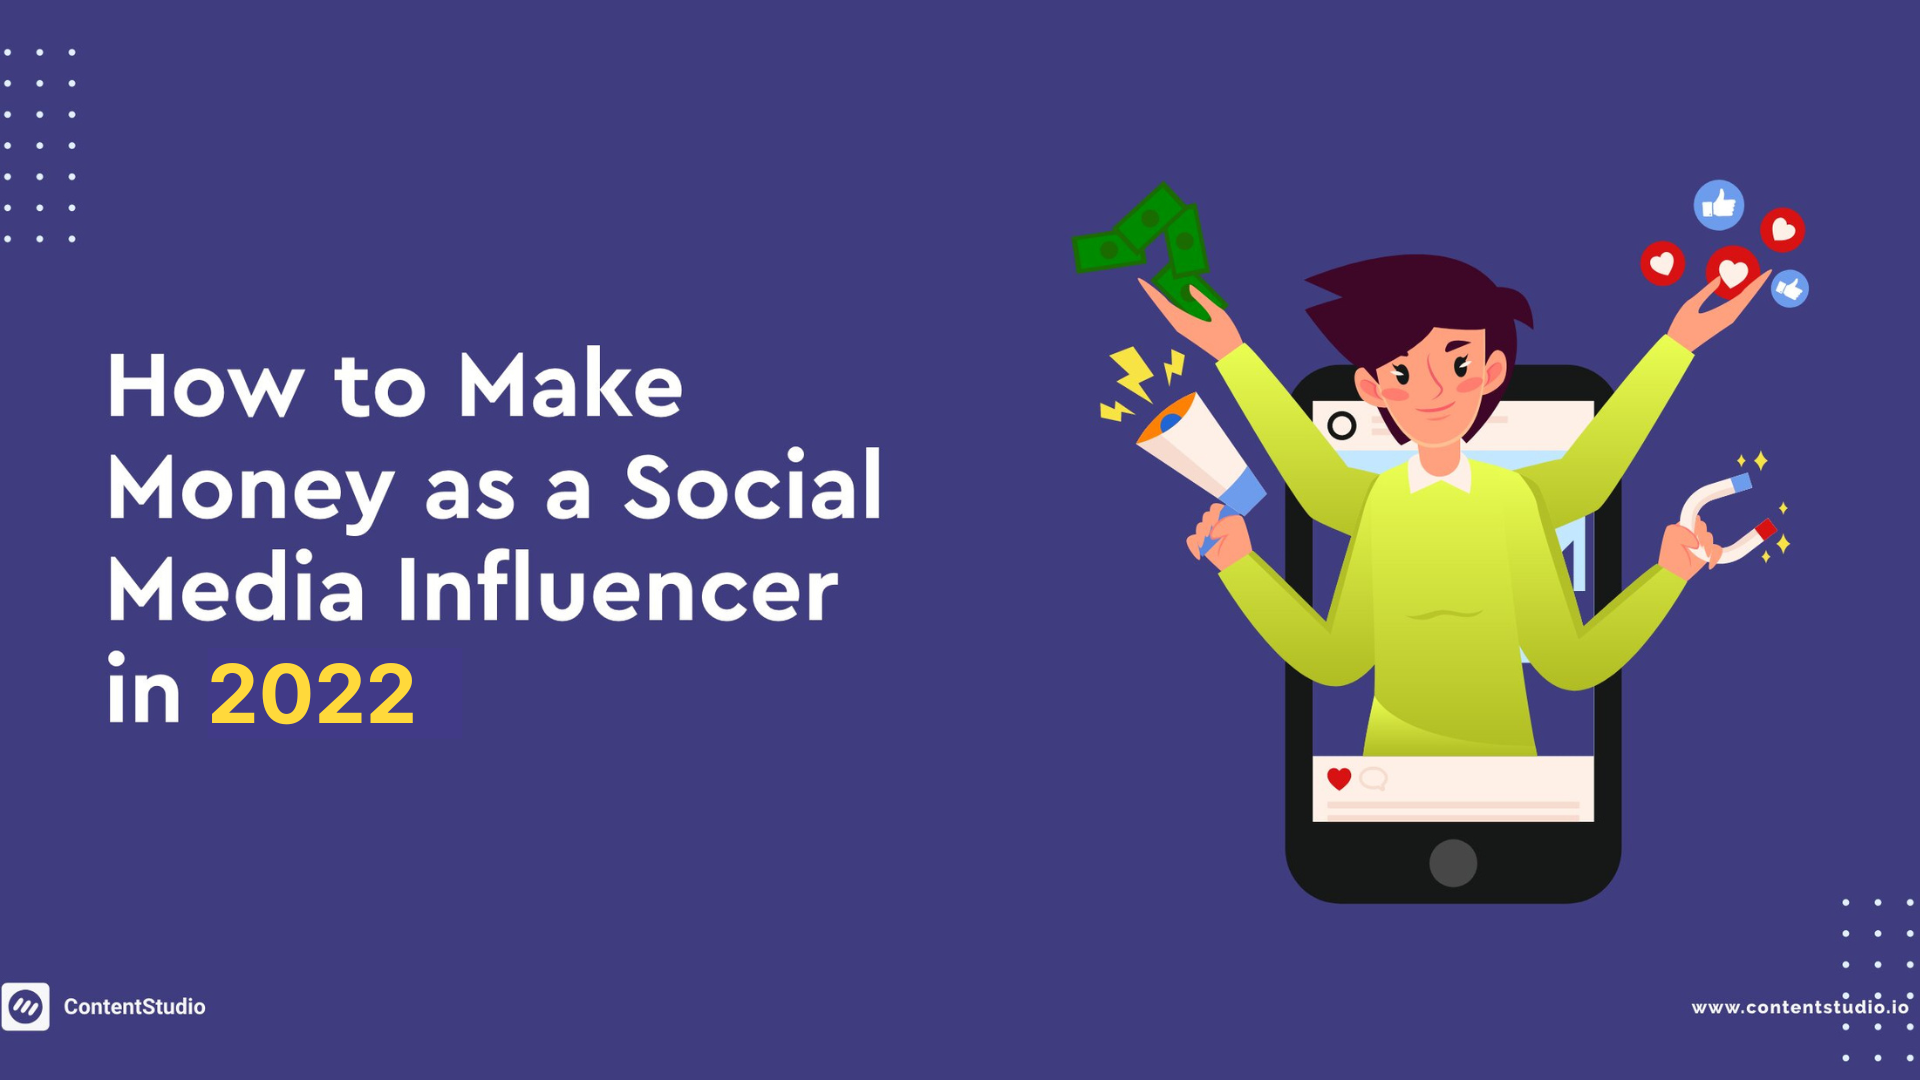 How to Make Money as a Social Media Influencer in 2022